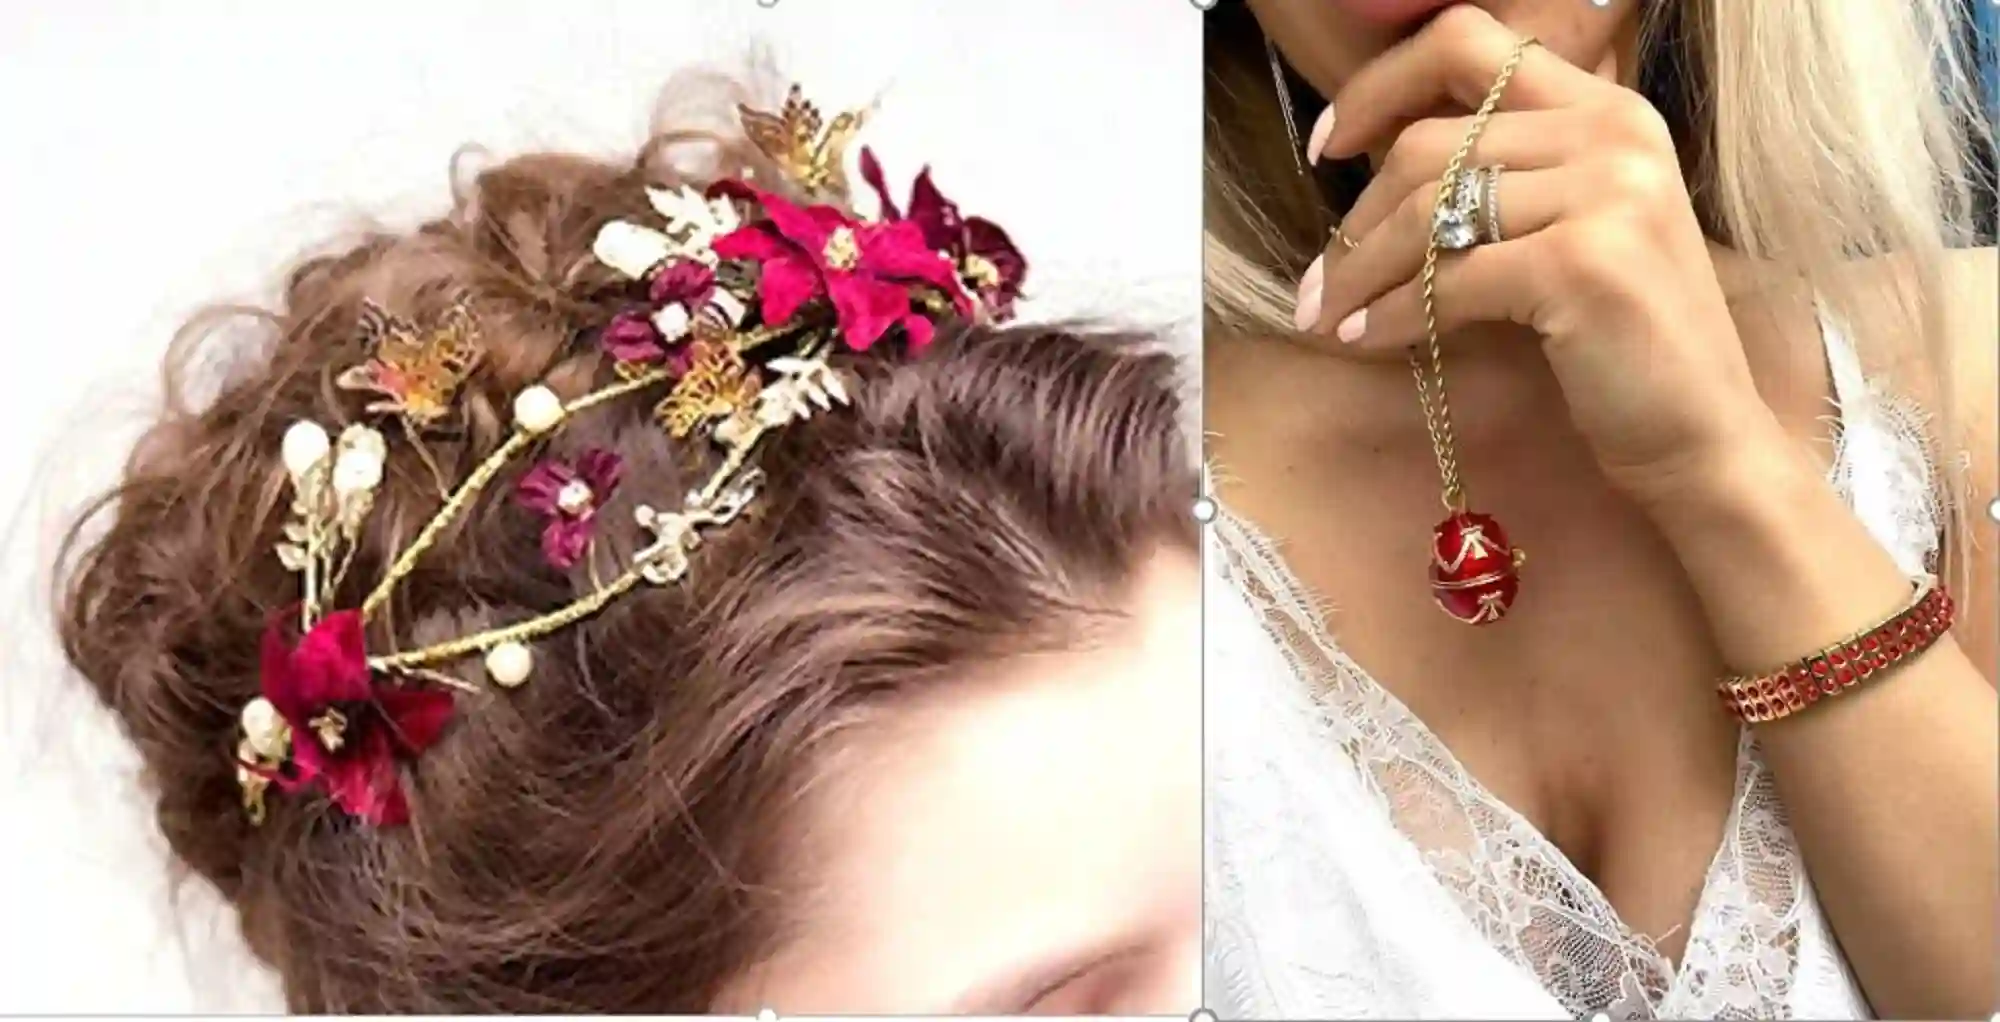 Christmas Jewelry SET, Faberge Egg NECKLACE & 2ct Ruby Bracelet + GOLD Pearl Hair Comb, Xmas Jewelry Gift, Christmas Necklace,Daughter gift 